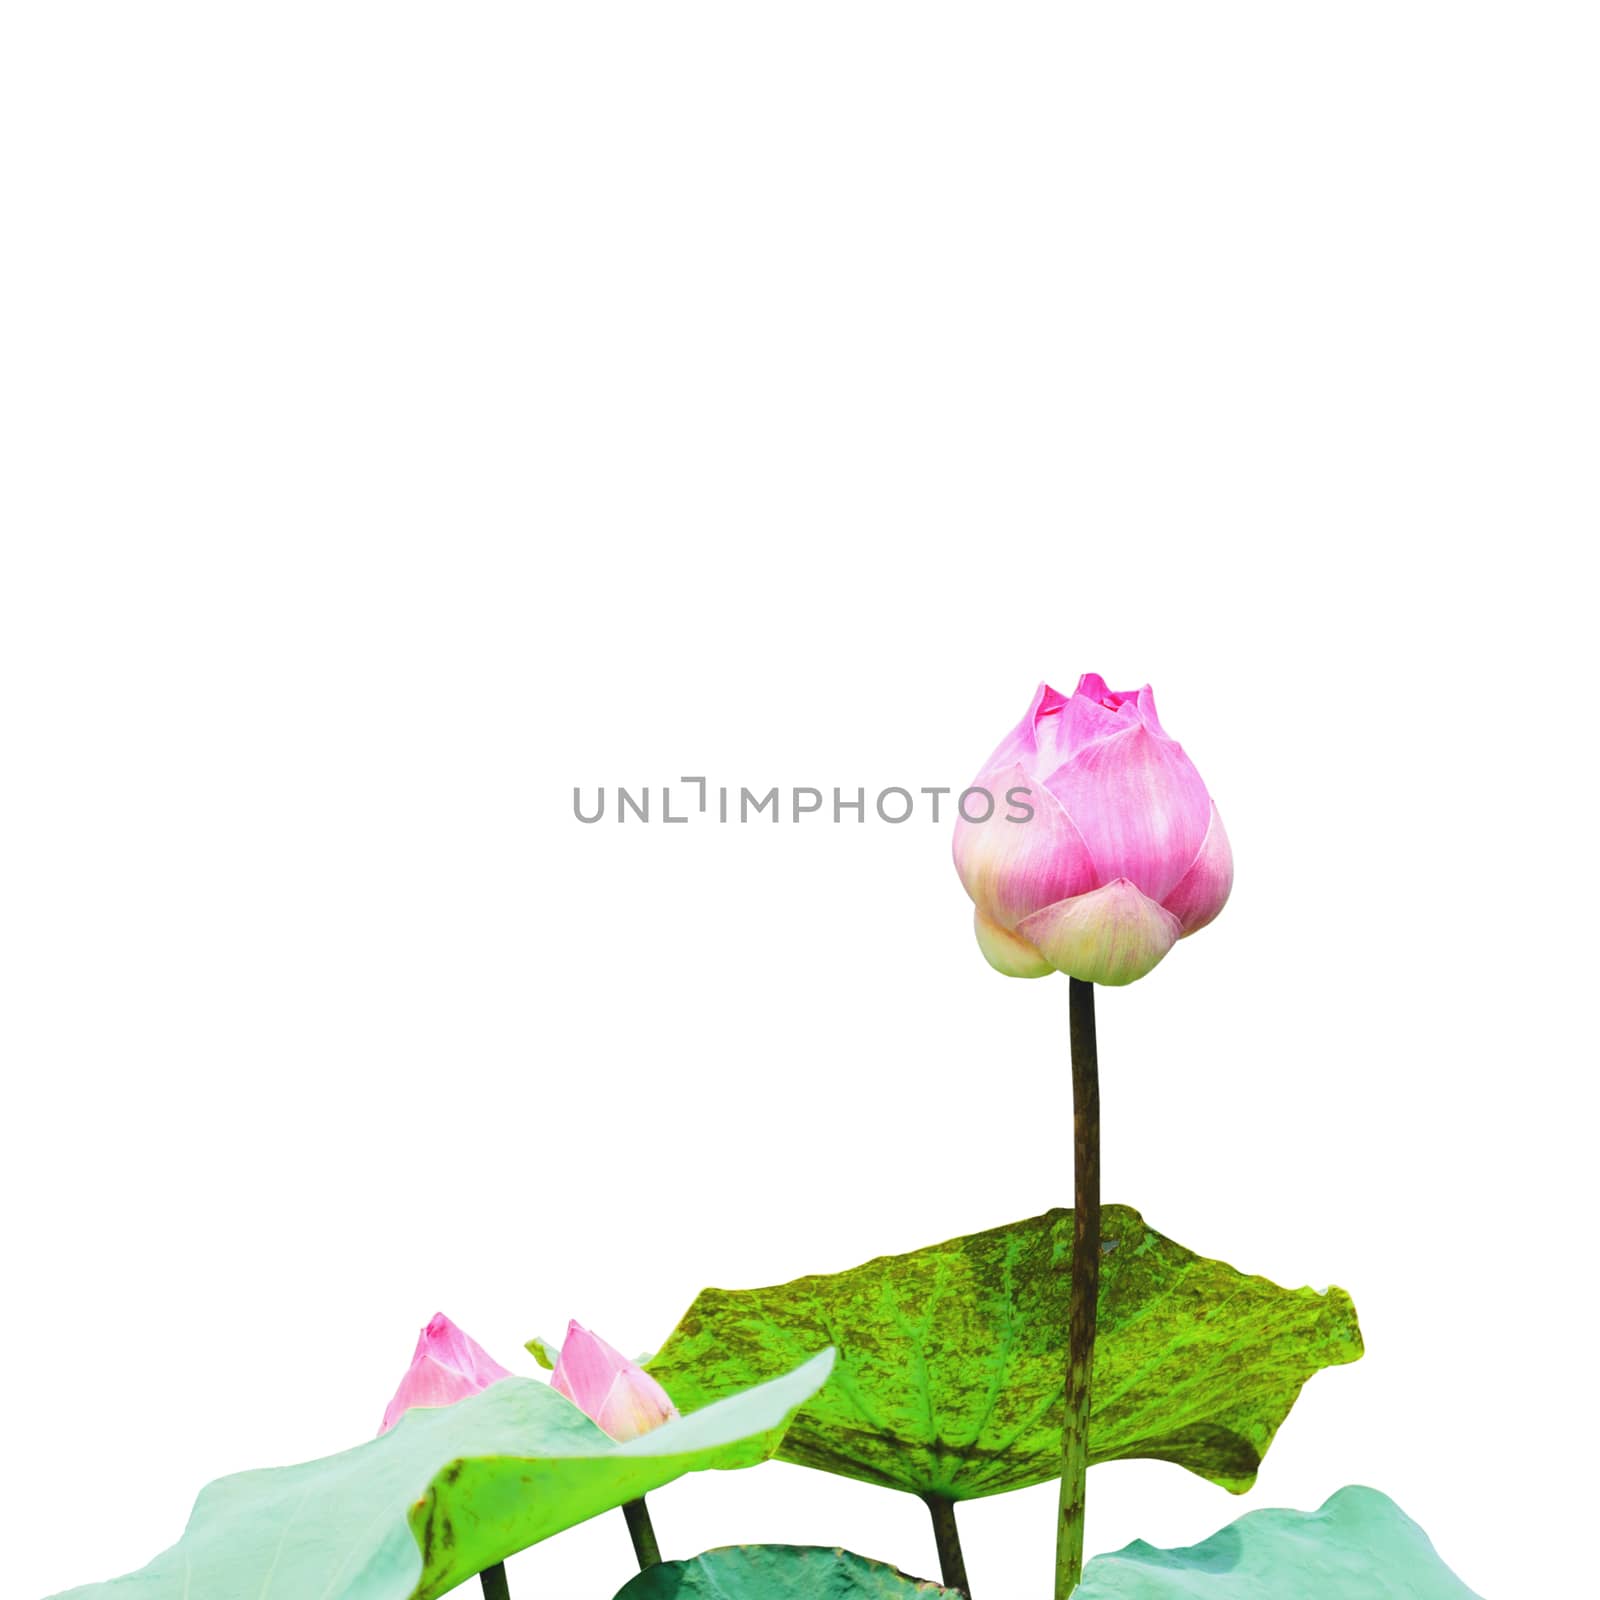 Lotus that is not yet bloomed with green leaves isolated on white background with clipping path.